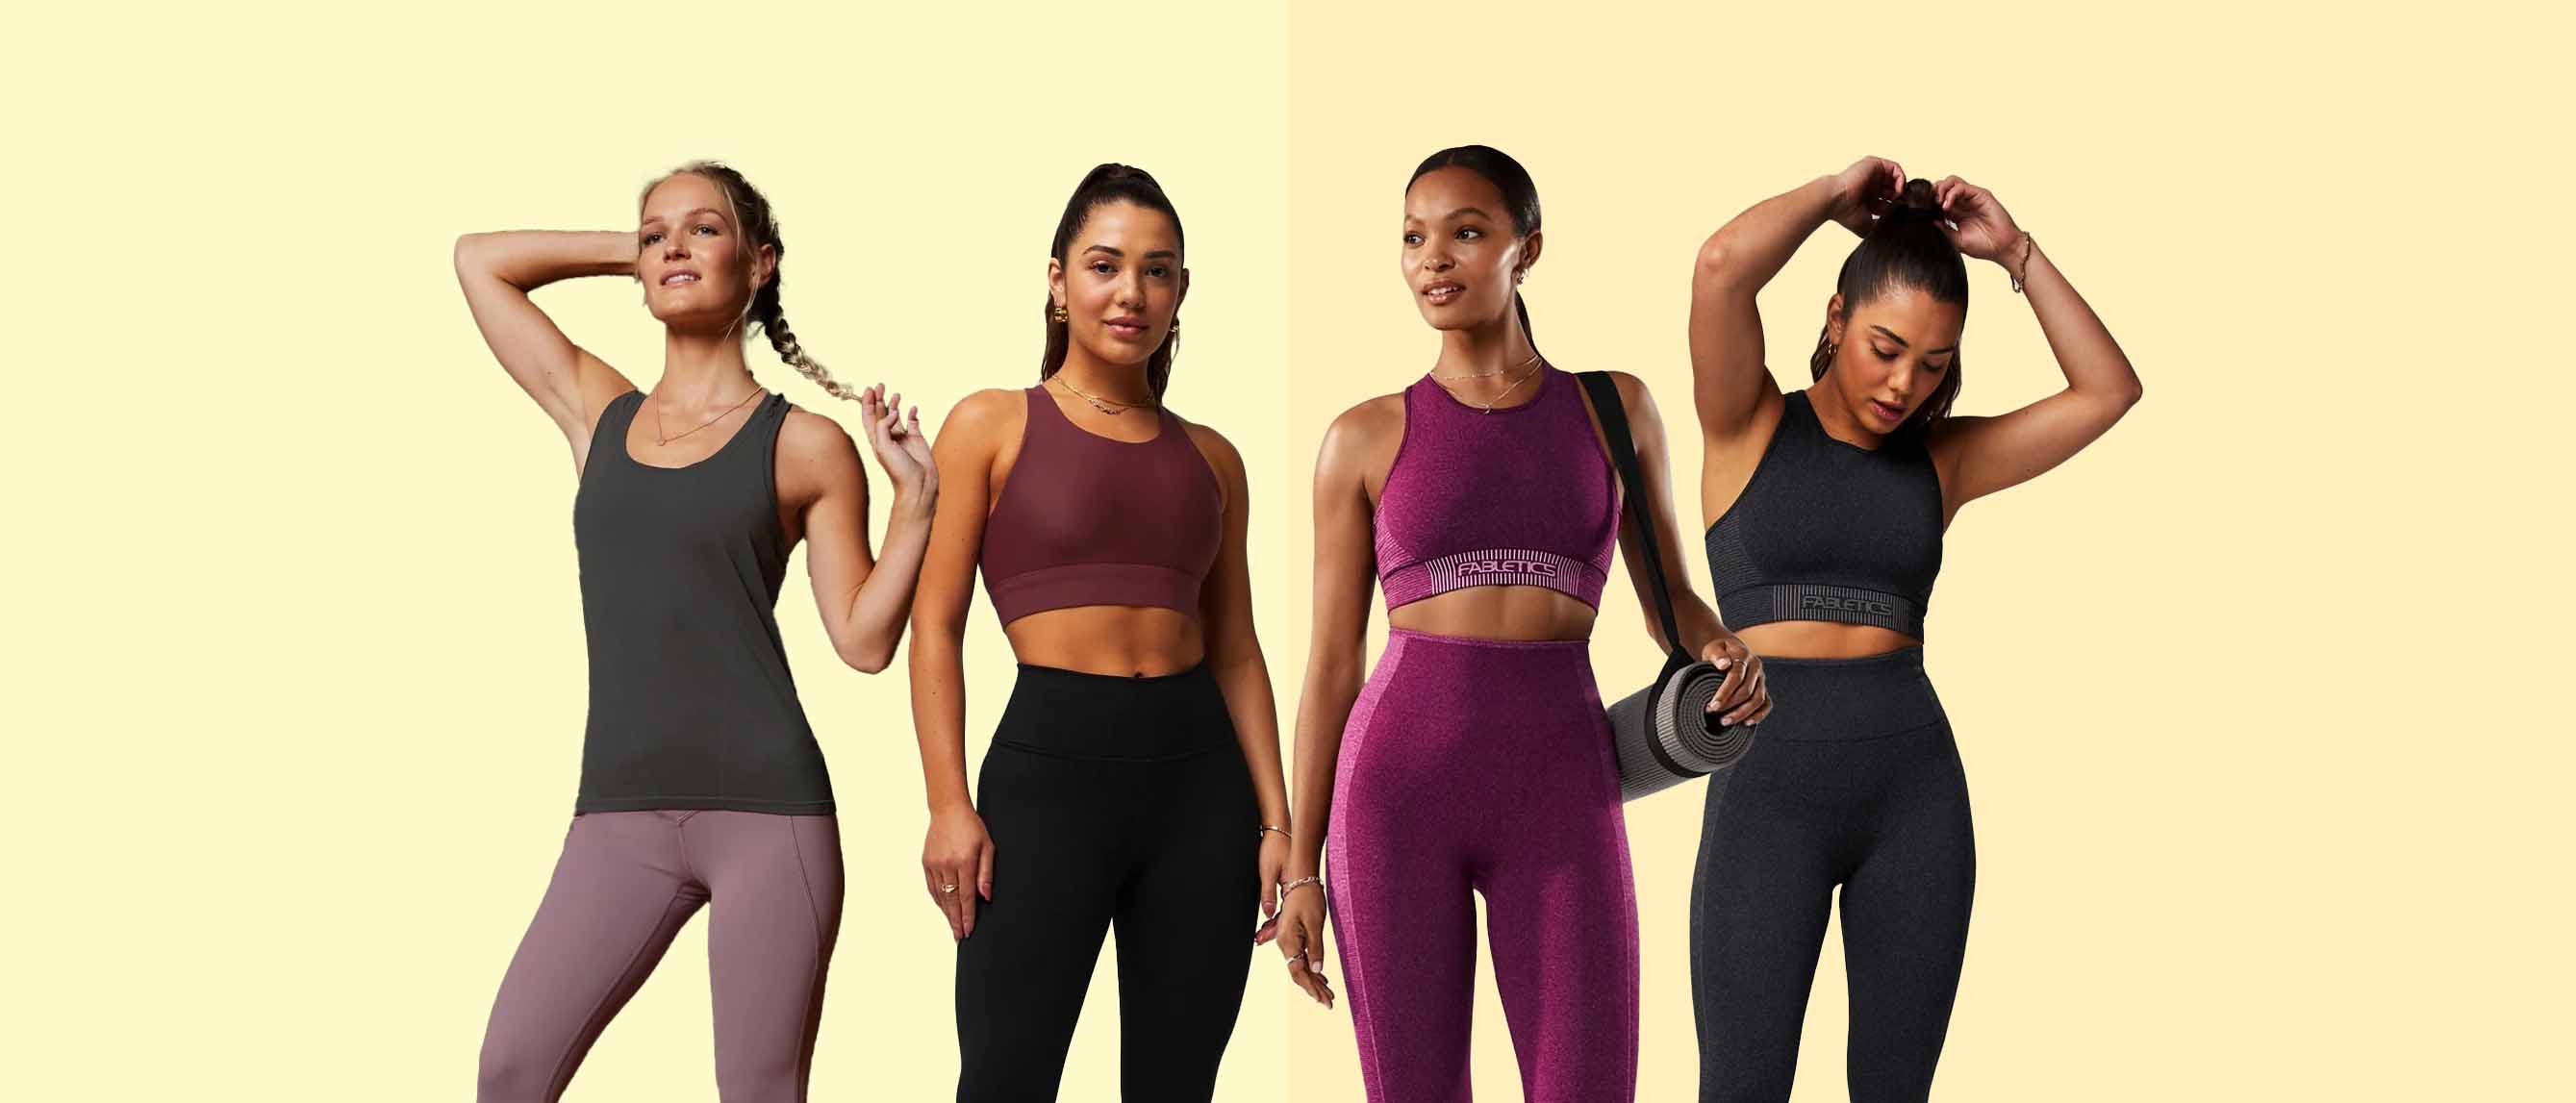 VIP 101: Stay connected - Fabletics